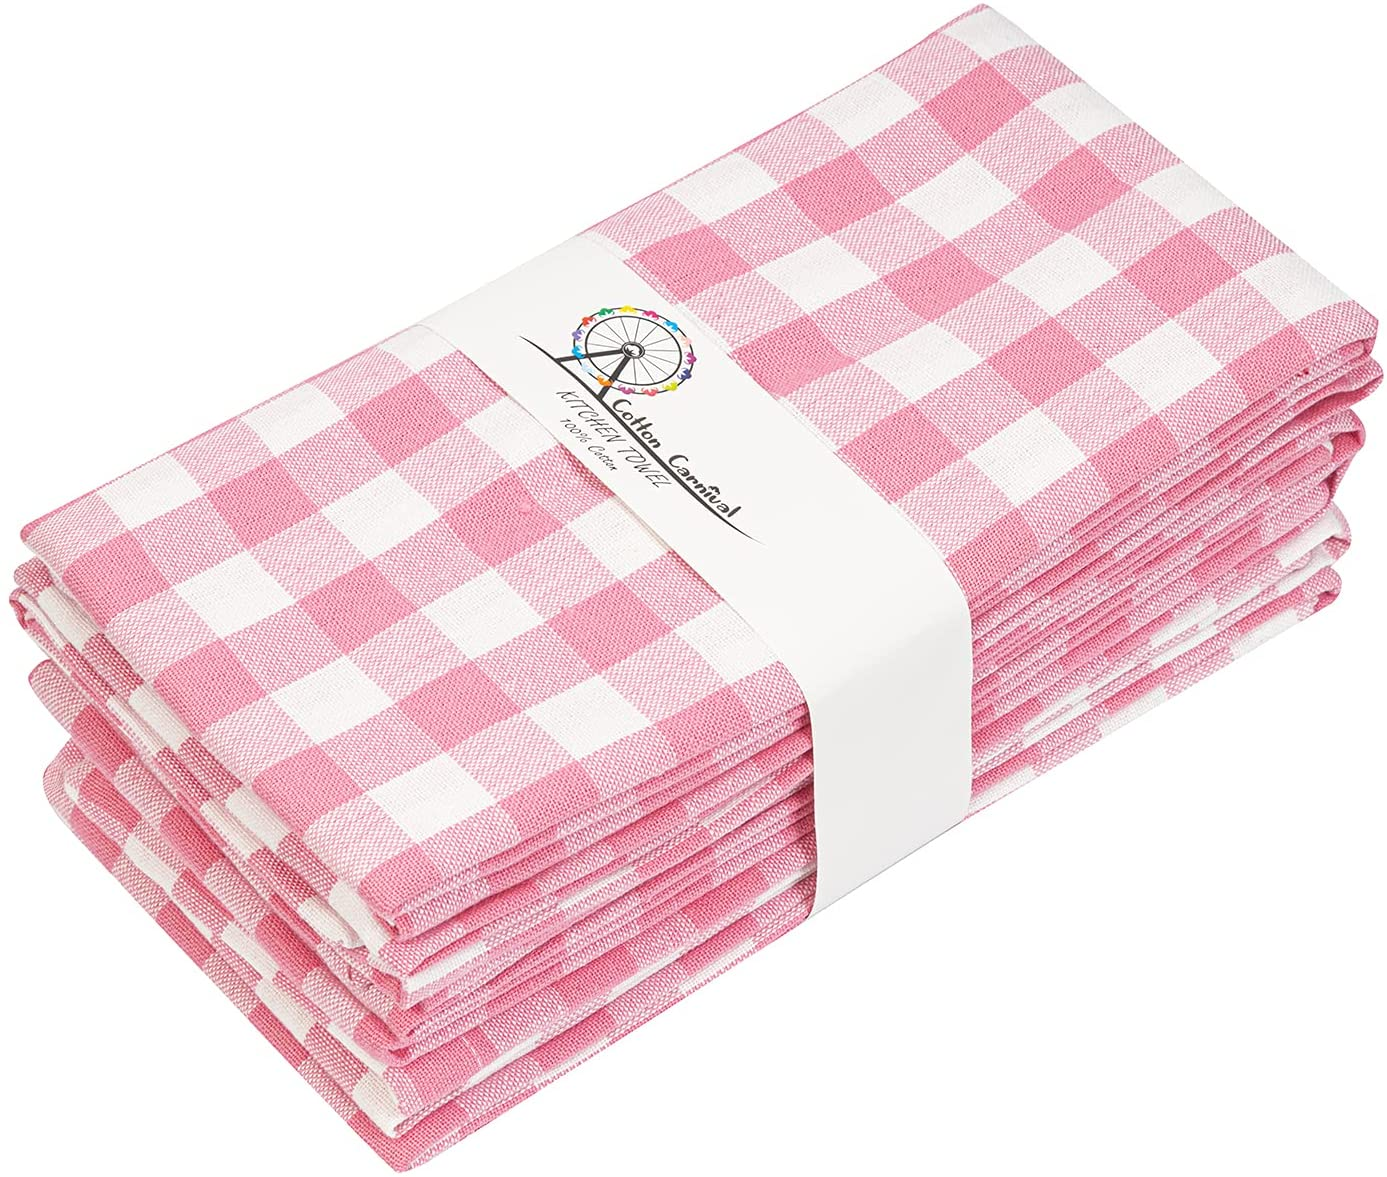 Pink checkered gingham dish towels. #frenchcountry #dishtowels #gingham